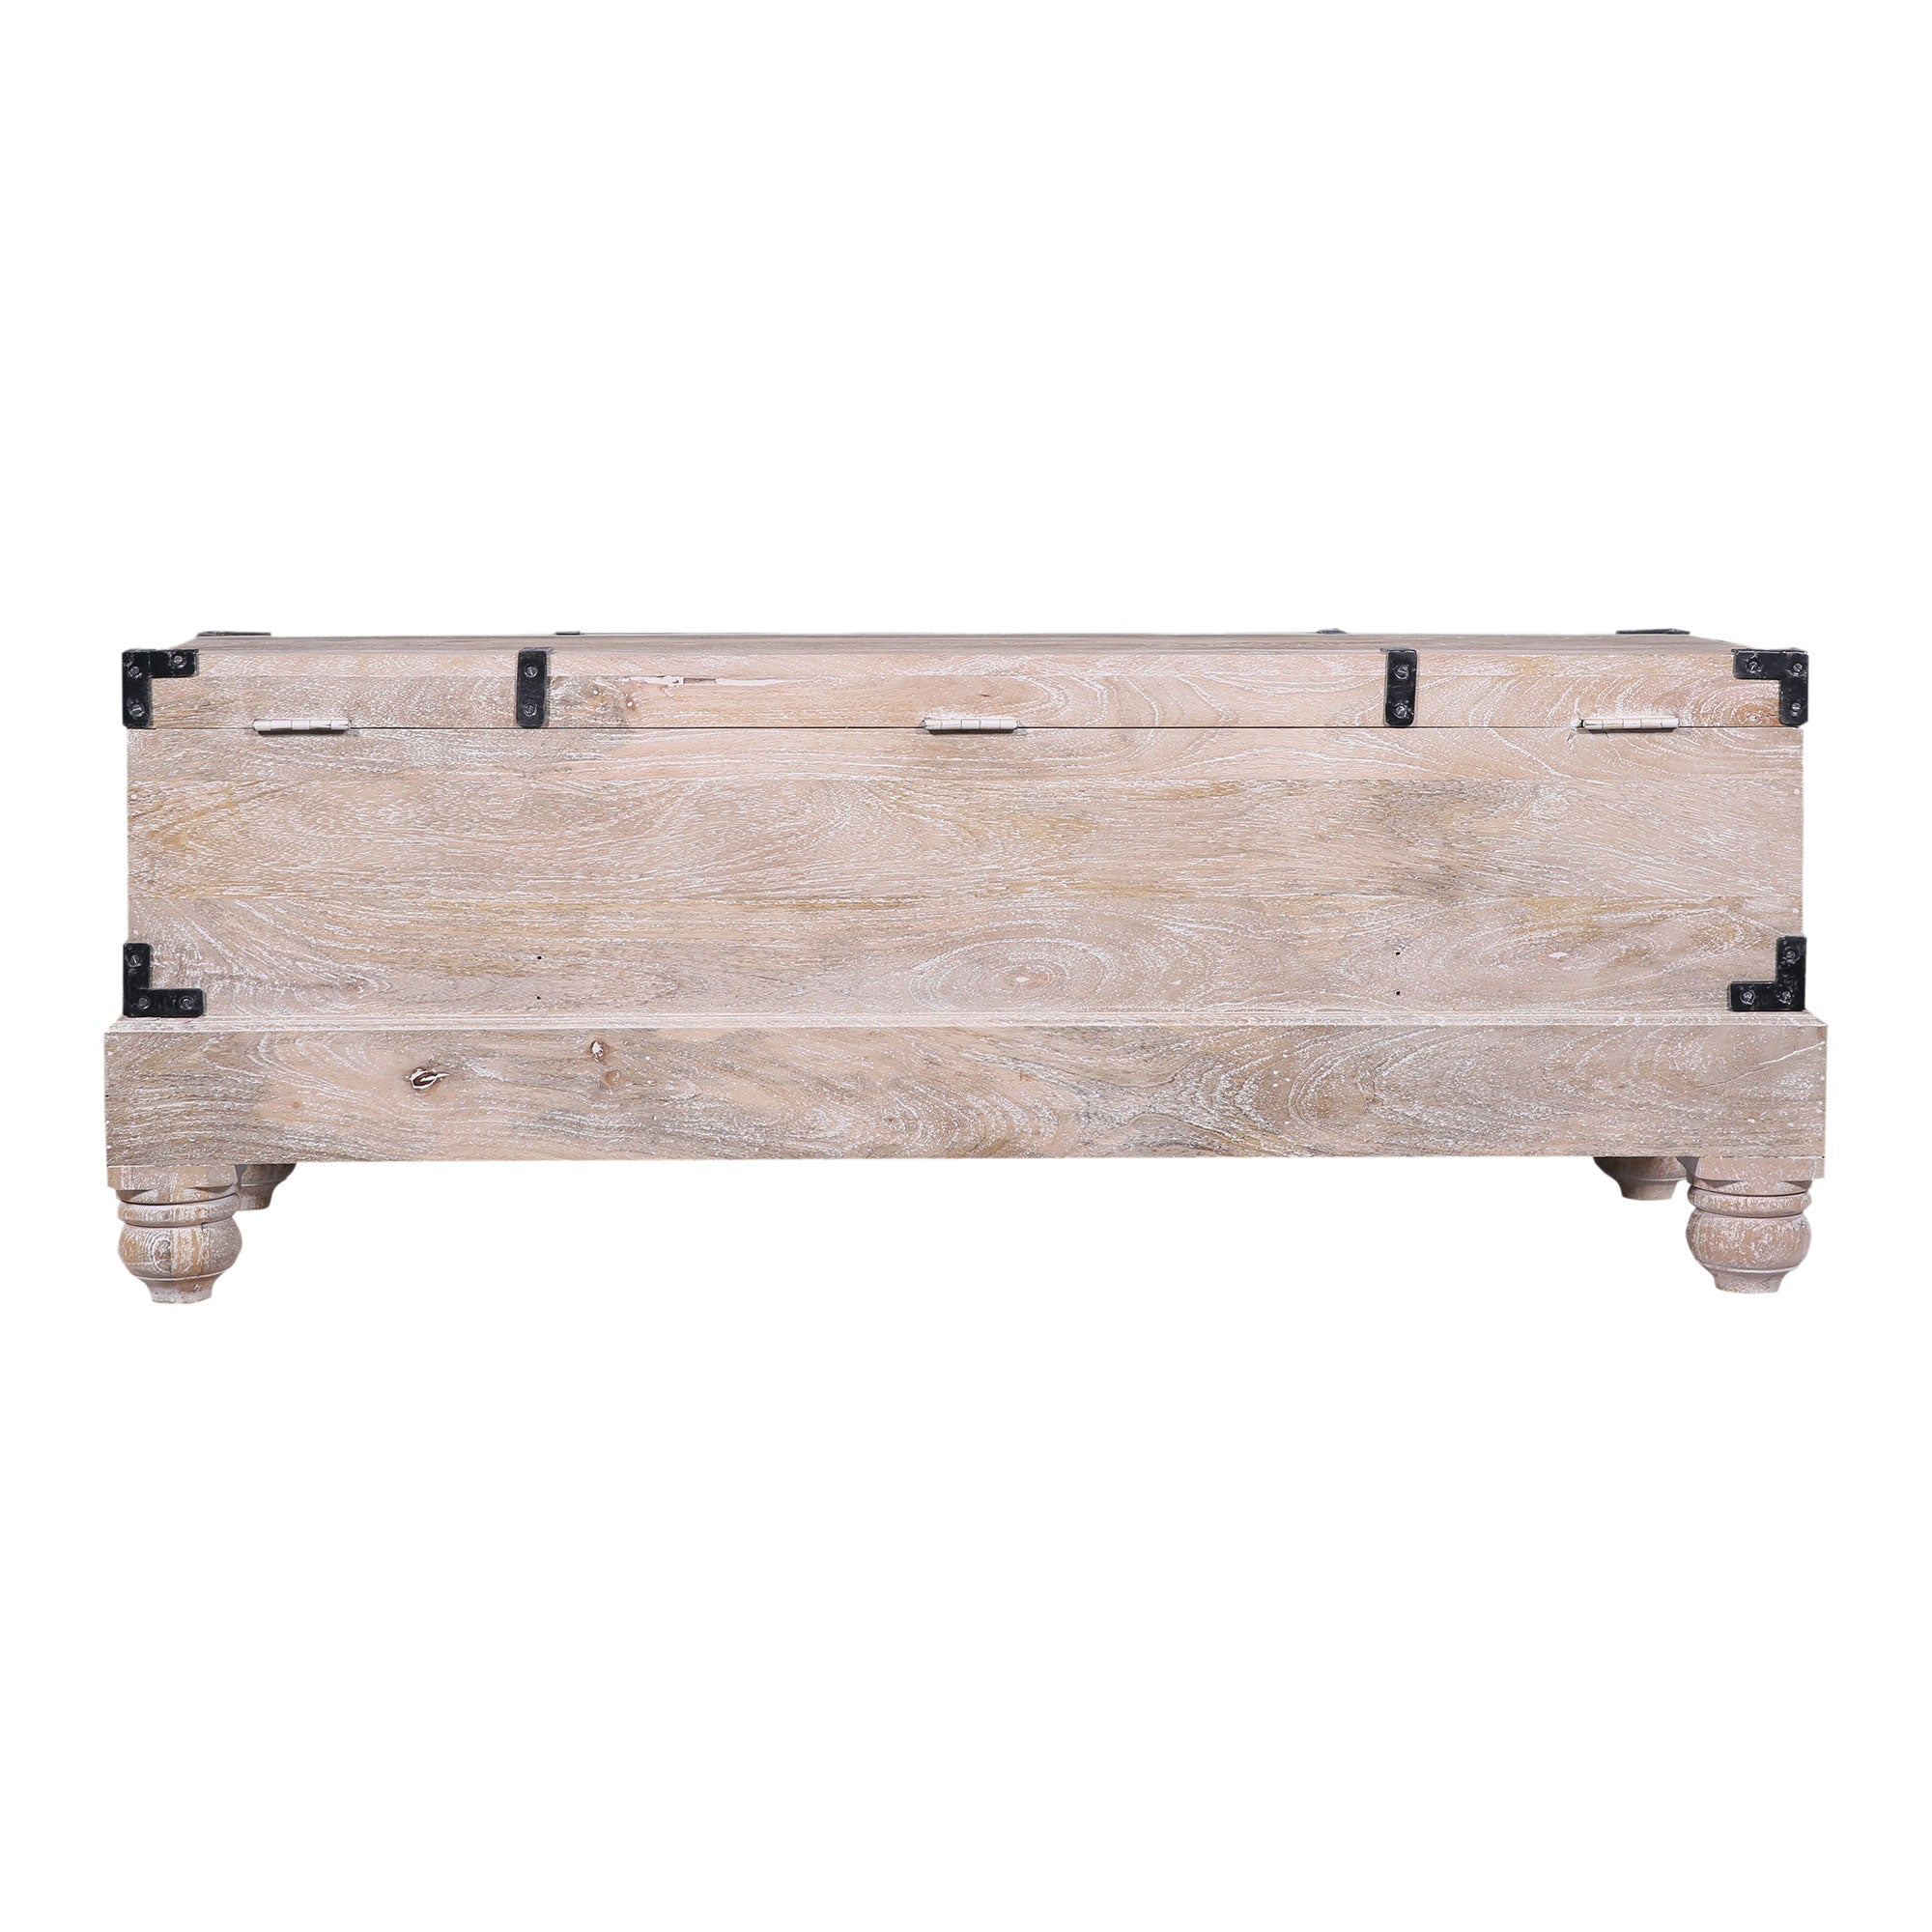 Nerio Nomad Wooden Storage Bench in Distressed Natural Finish in Ottomans & Benches by VMInnovations